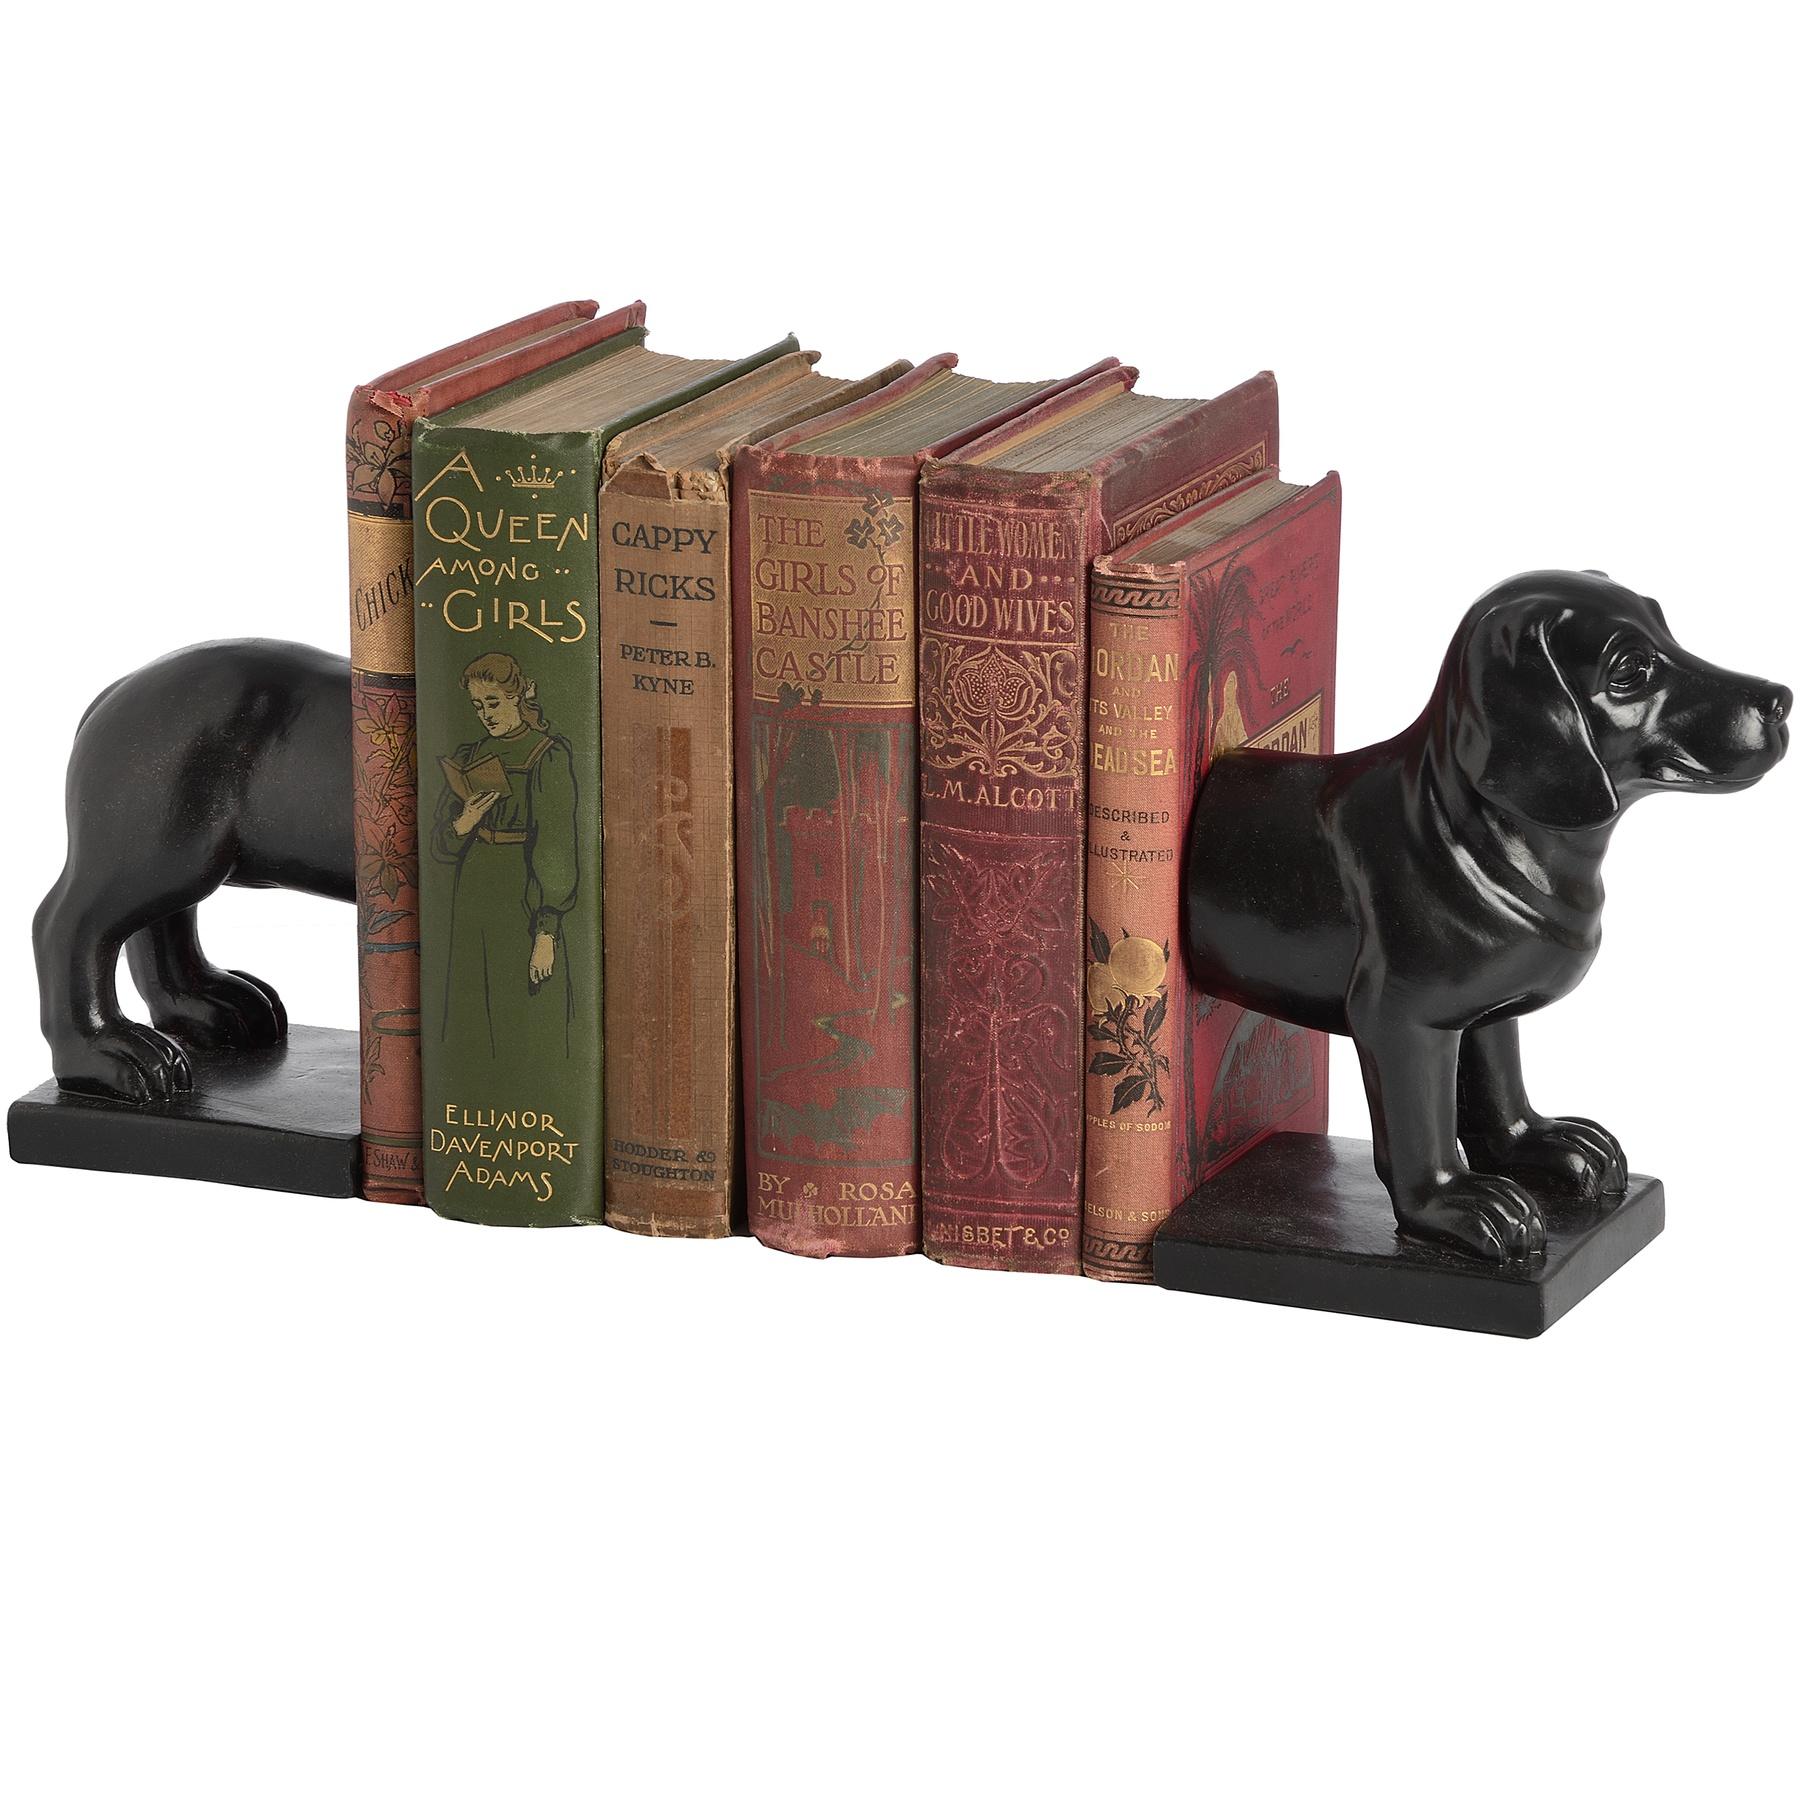 Dachshund bookends